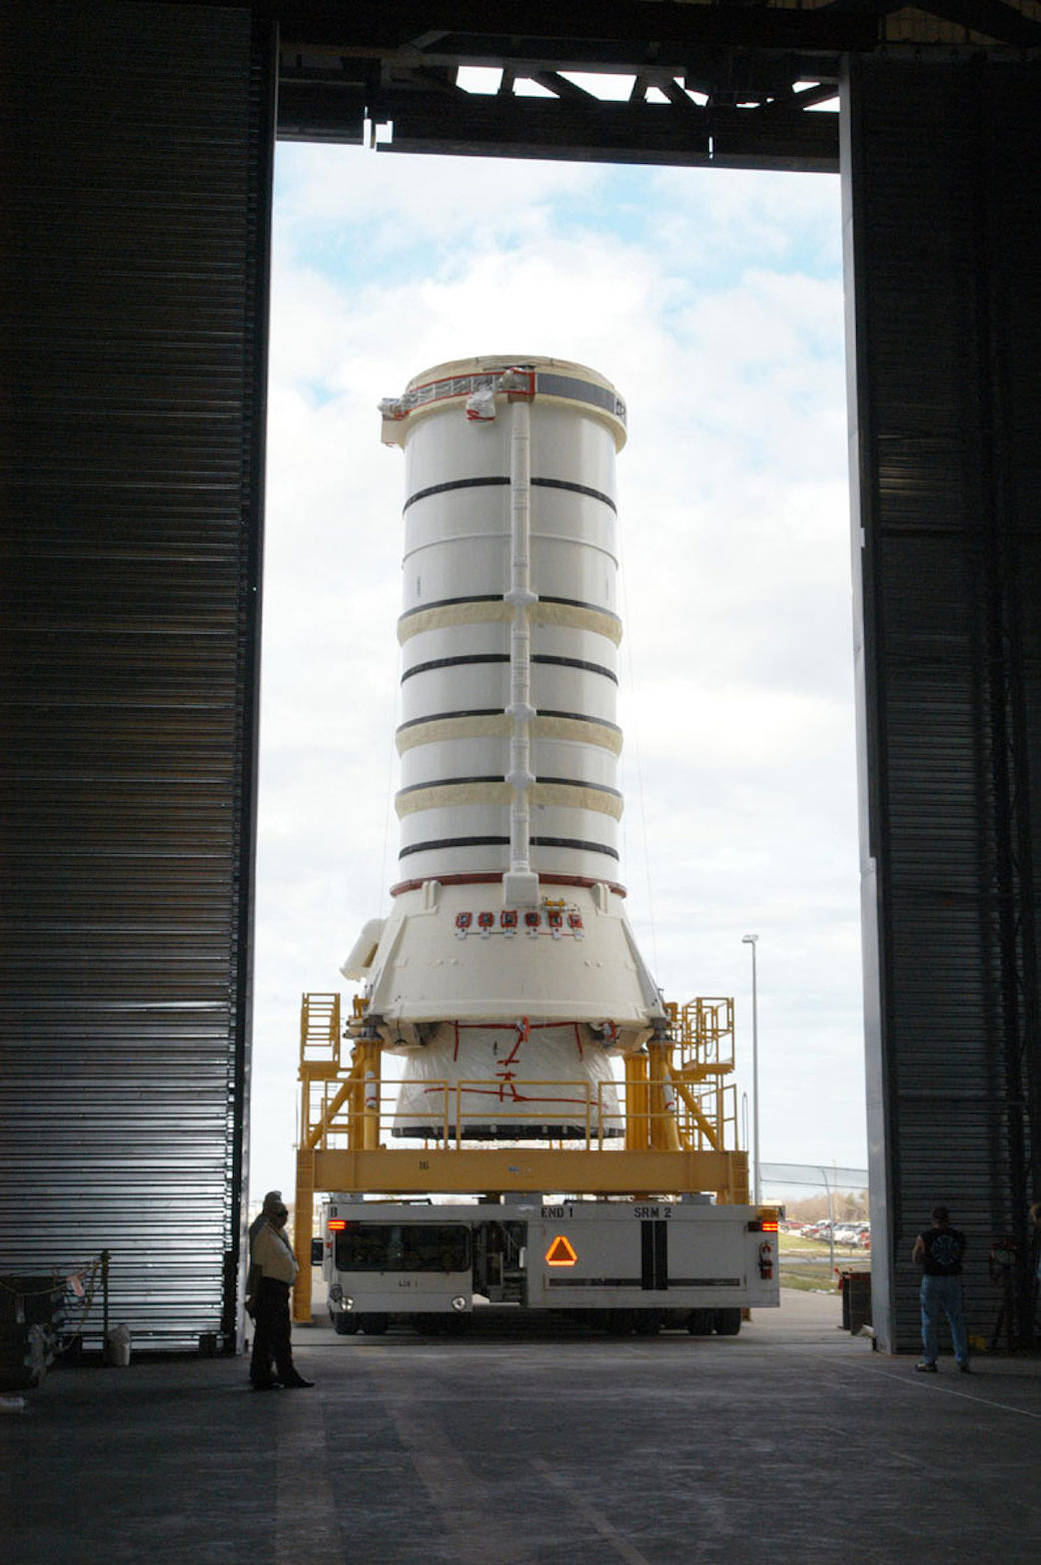 aft skirt and lower segment of a Solid Rocket Booster (SRB) moving through doors  